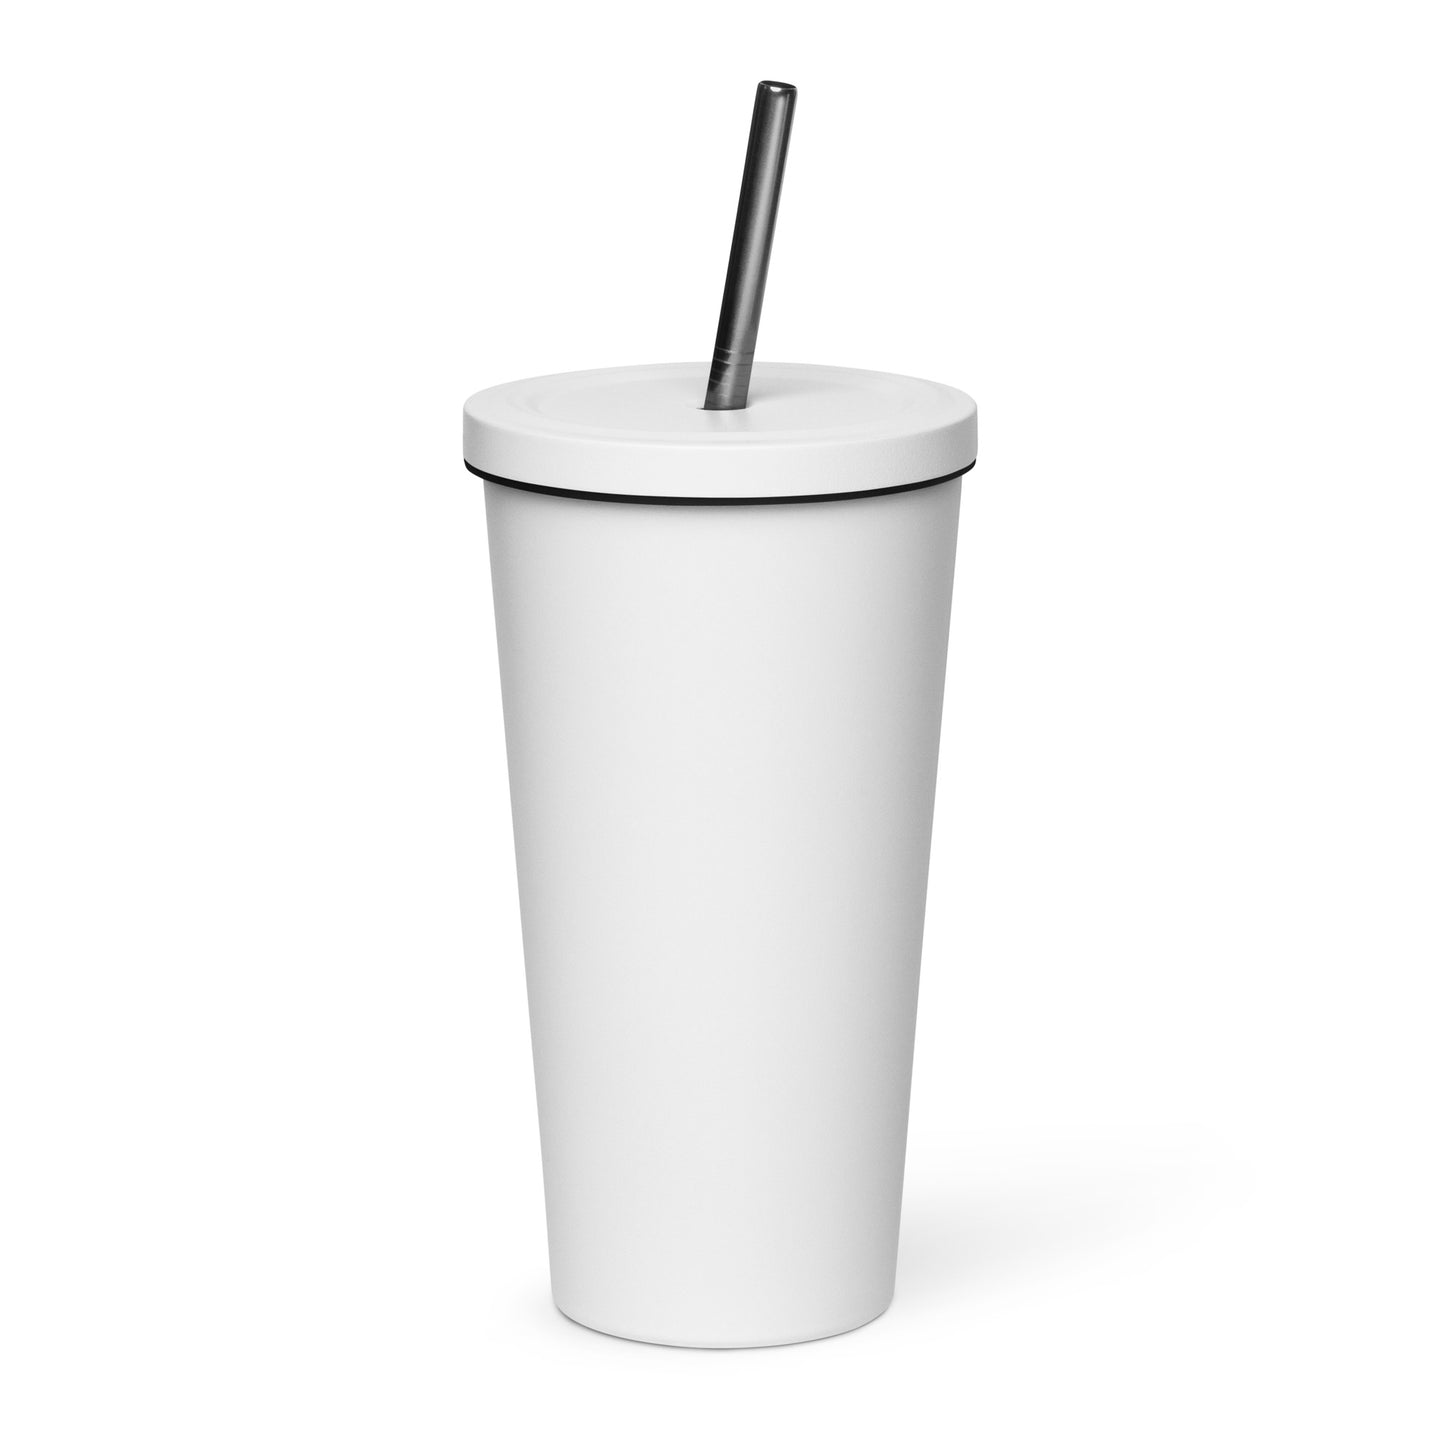 Insulated tumbler with a straw- Crazy Horse 22 - offthespeed